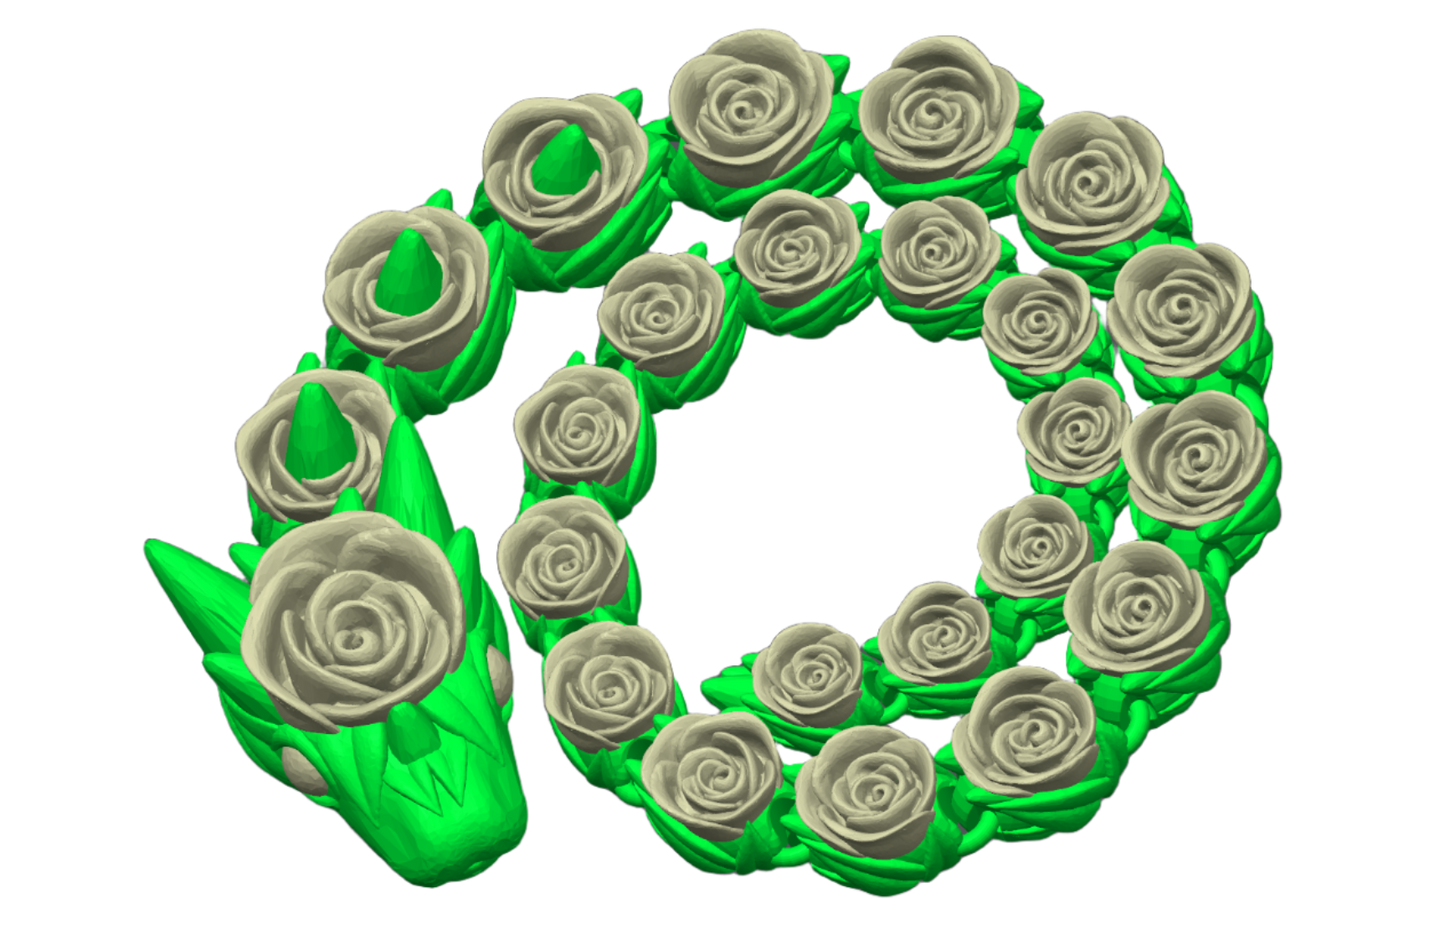 3d printed snake decorated with roses, has flexible joints to fidget with, highly detailed sculpting by Cinderwing3D, high quality printed, personalizable